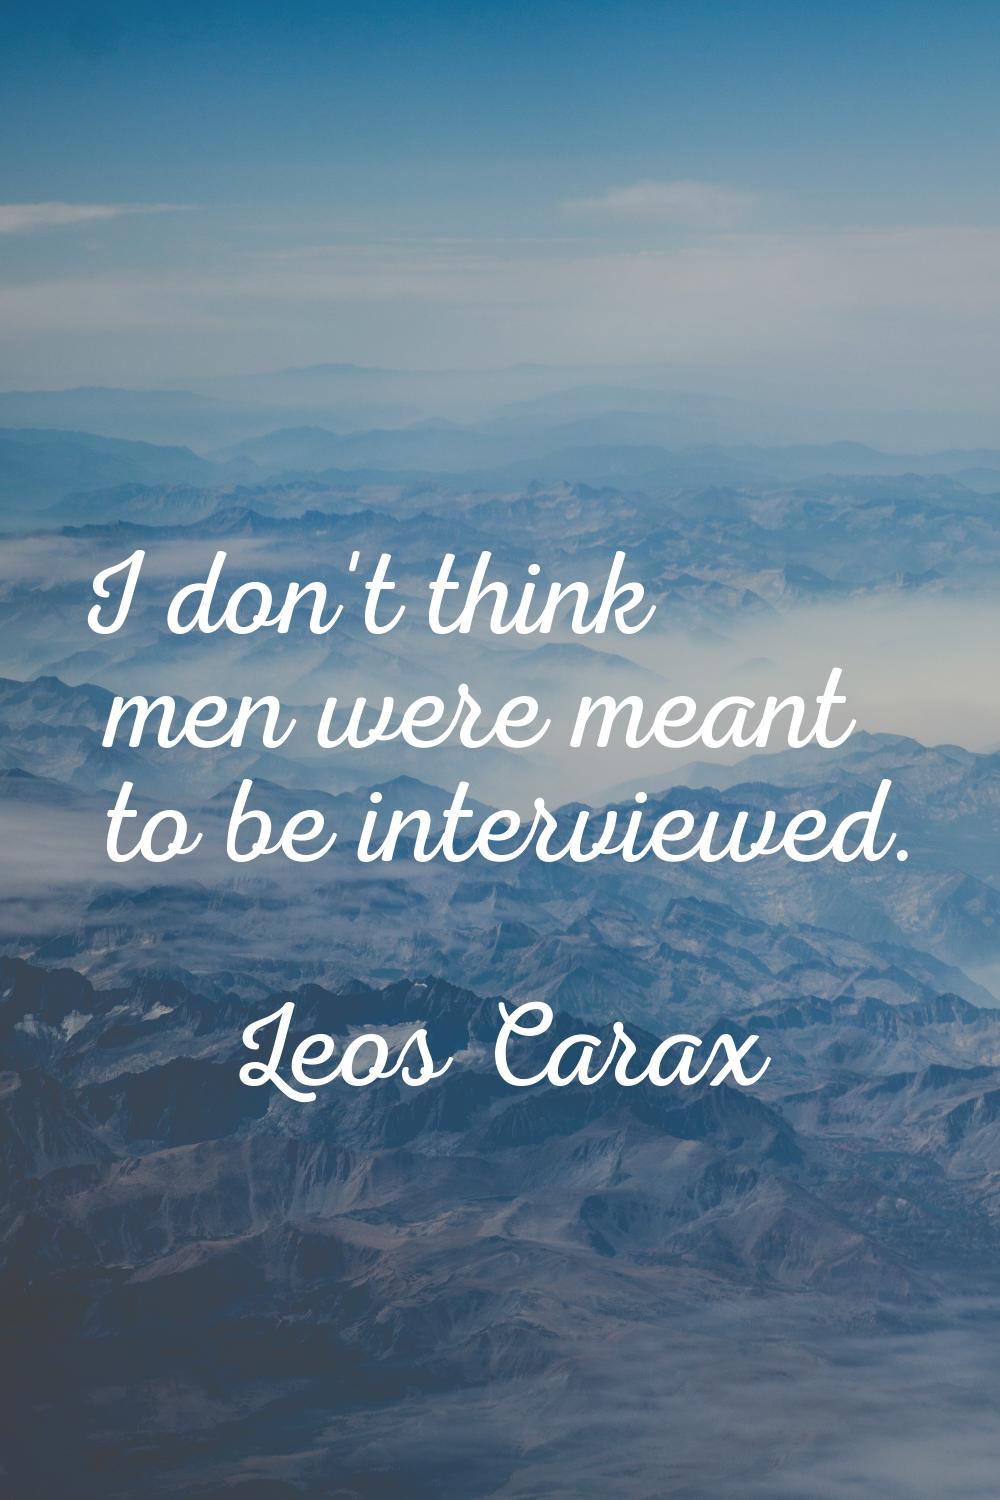 I don't think men were meant to be interviewed.